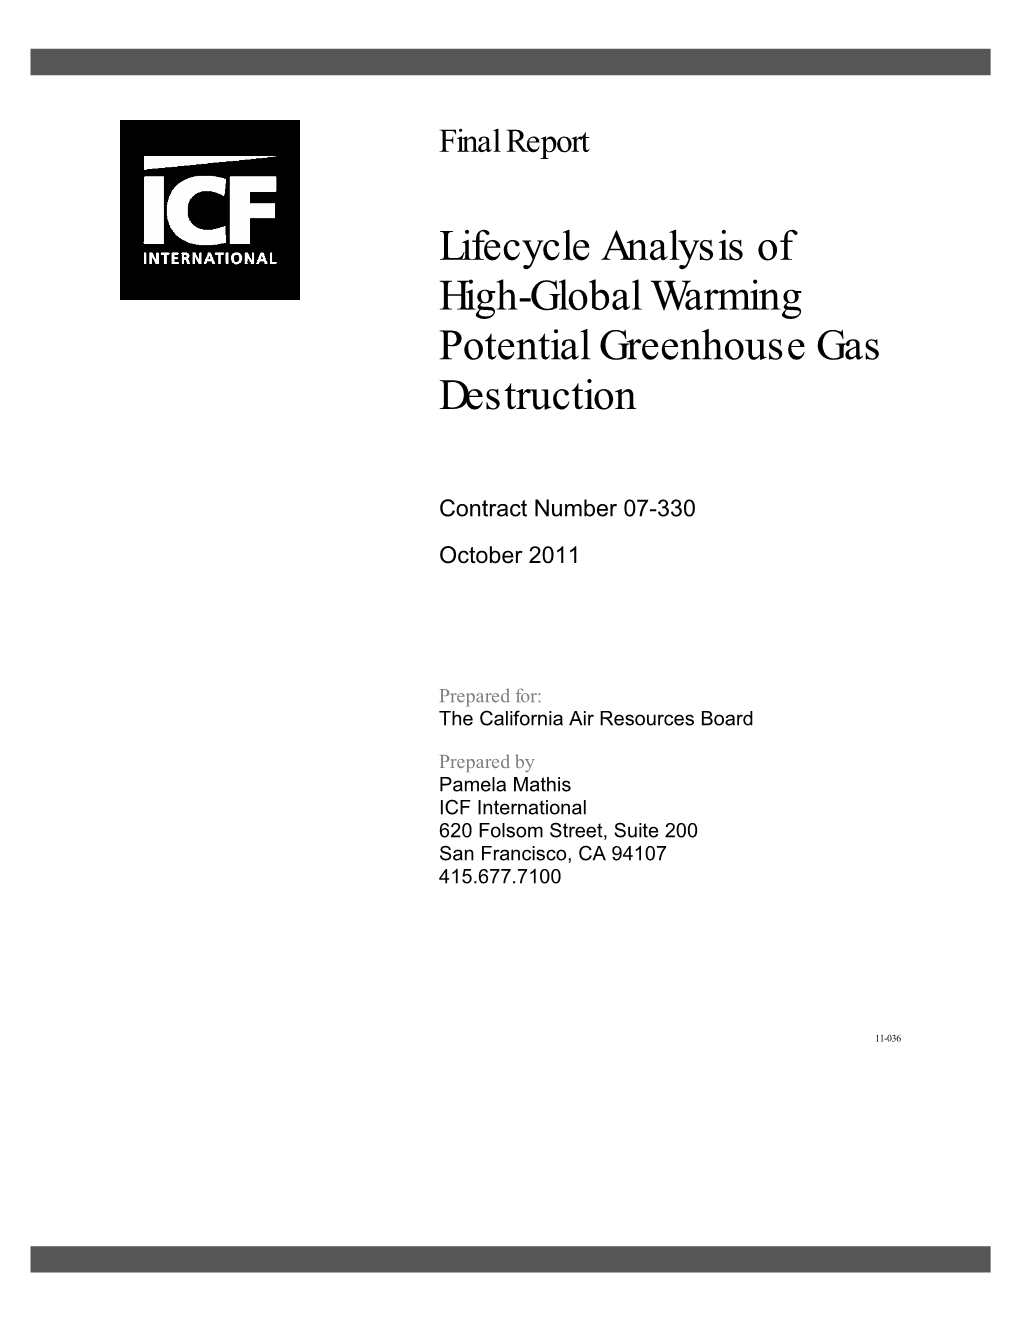 Lifecycle Analysis of High-Global Warming Potential Greenhouse Gas Destruction